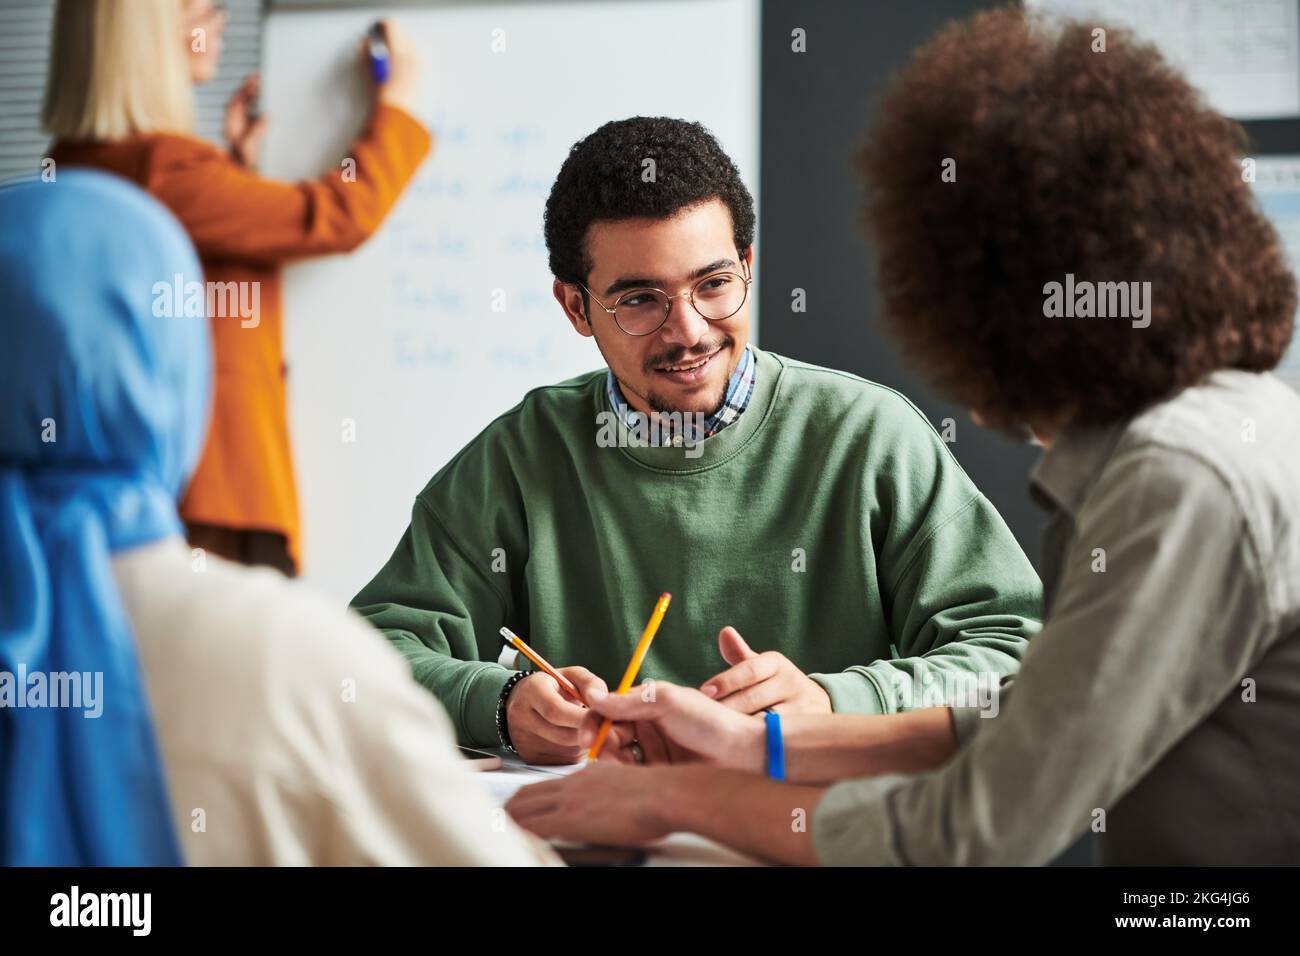 Happy young man in eyeglasses communicating with another student at break between lessons against teacher preparing for presentation Stock Photo